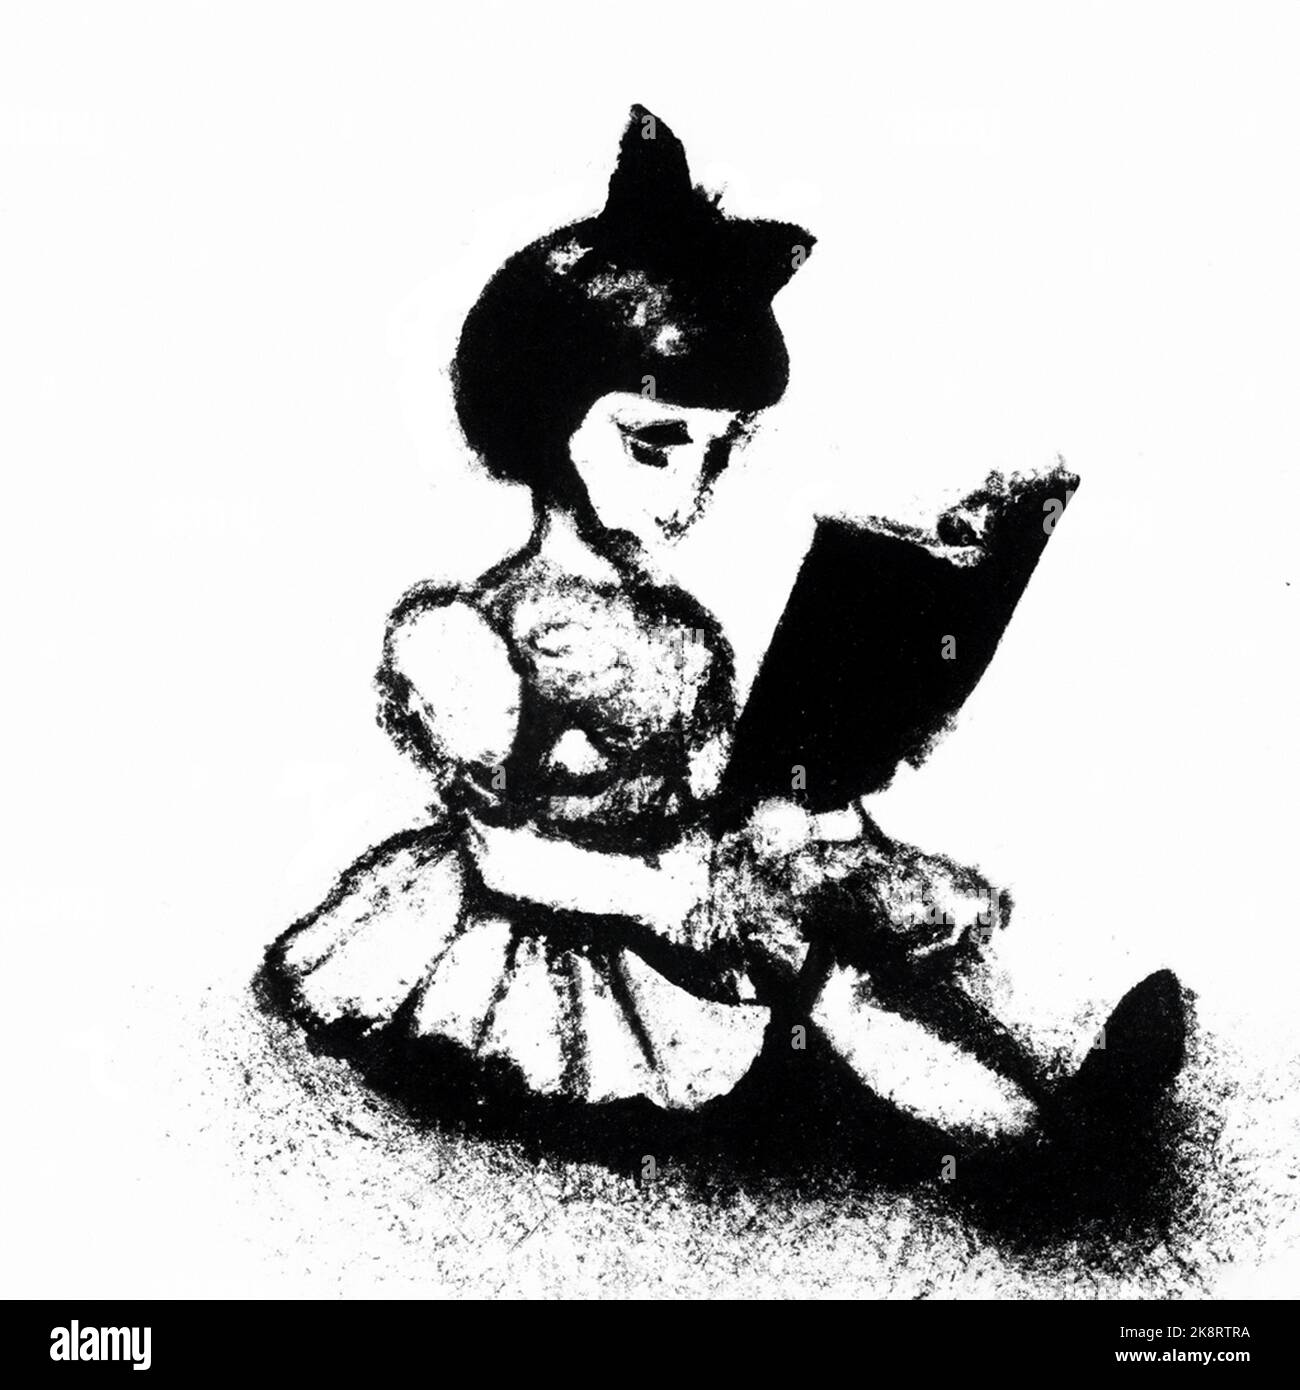 Young girl sitting with a large book, reading. Bow in her hair, black and white hand drawn illustration. Stock Photo